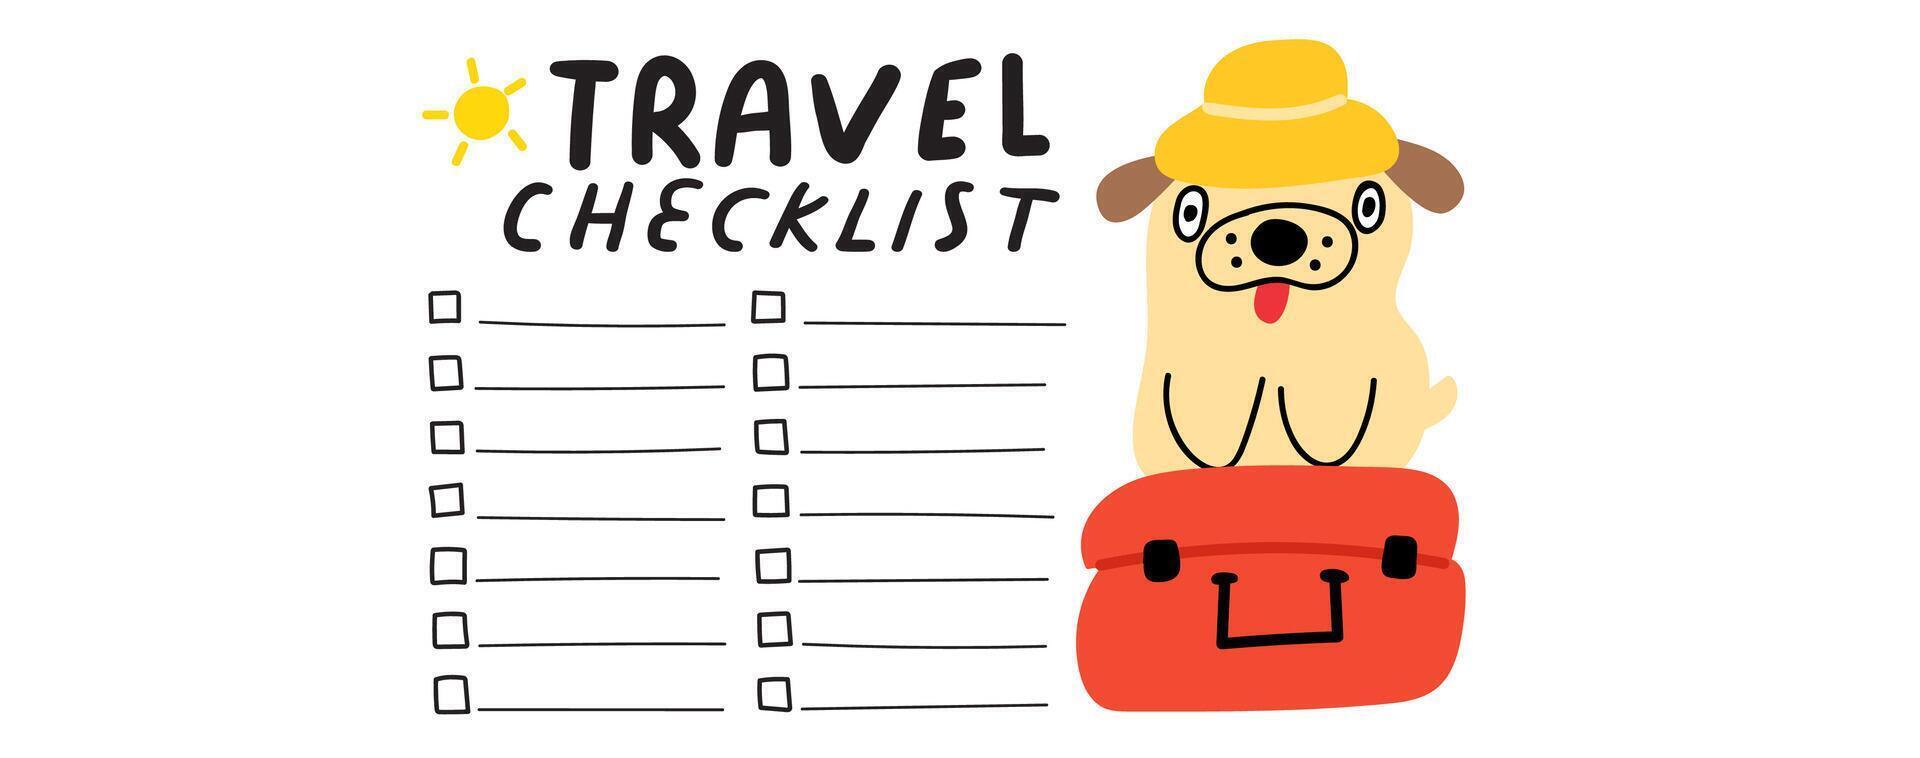 Travel checklist. Funny pug. Plan a vacation. Flat vector illustration on white background.